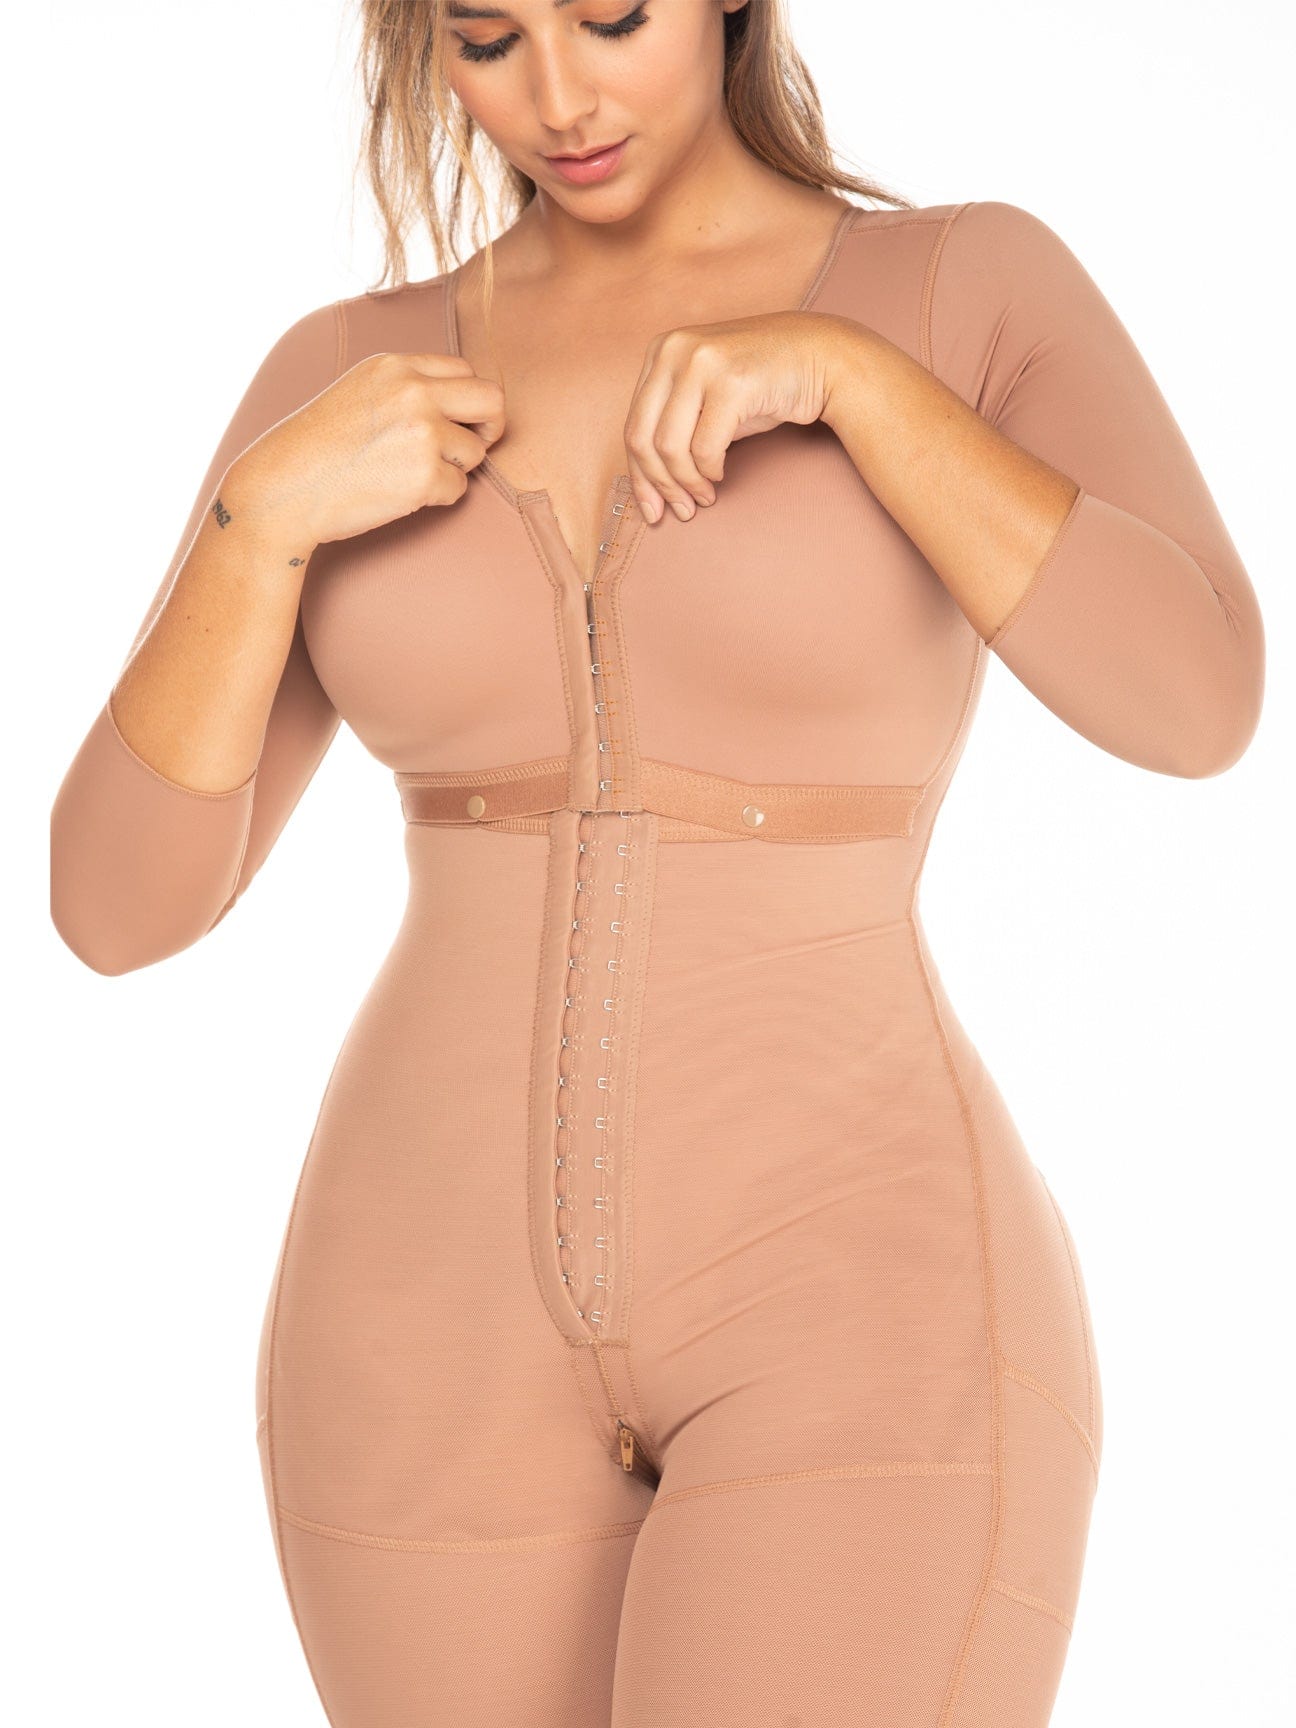  D066 Fajas Colombianas Post Surgery And Postpartum Tummy  Tuck Compression Garment For Women Mocha 3XL